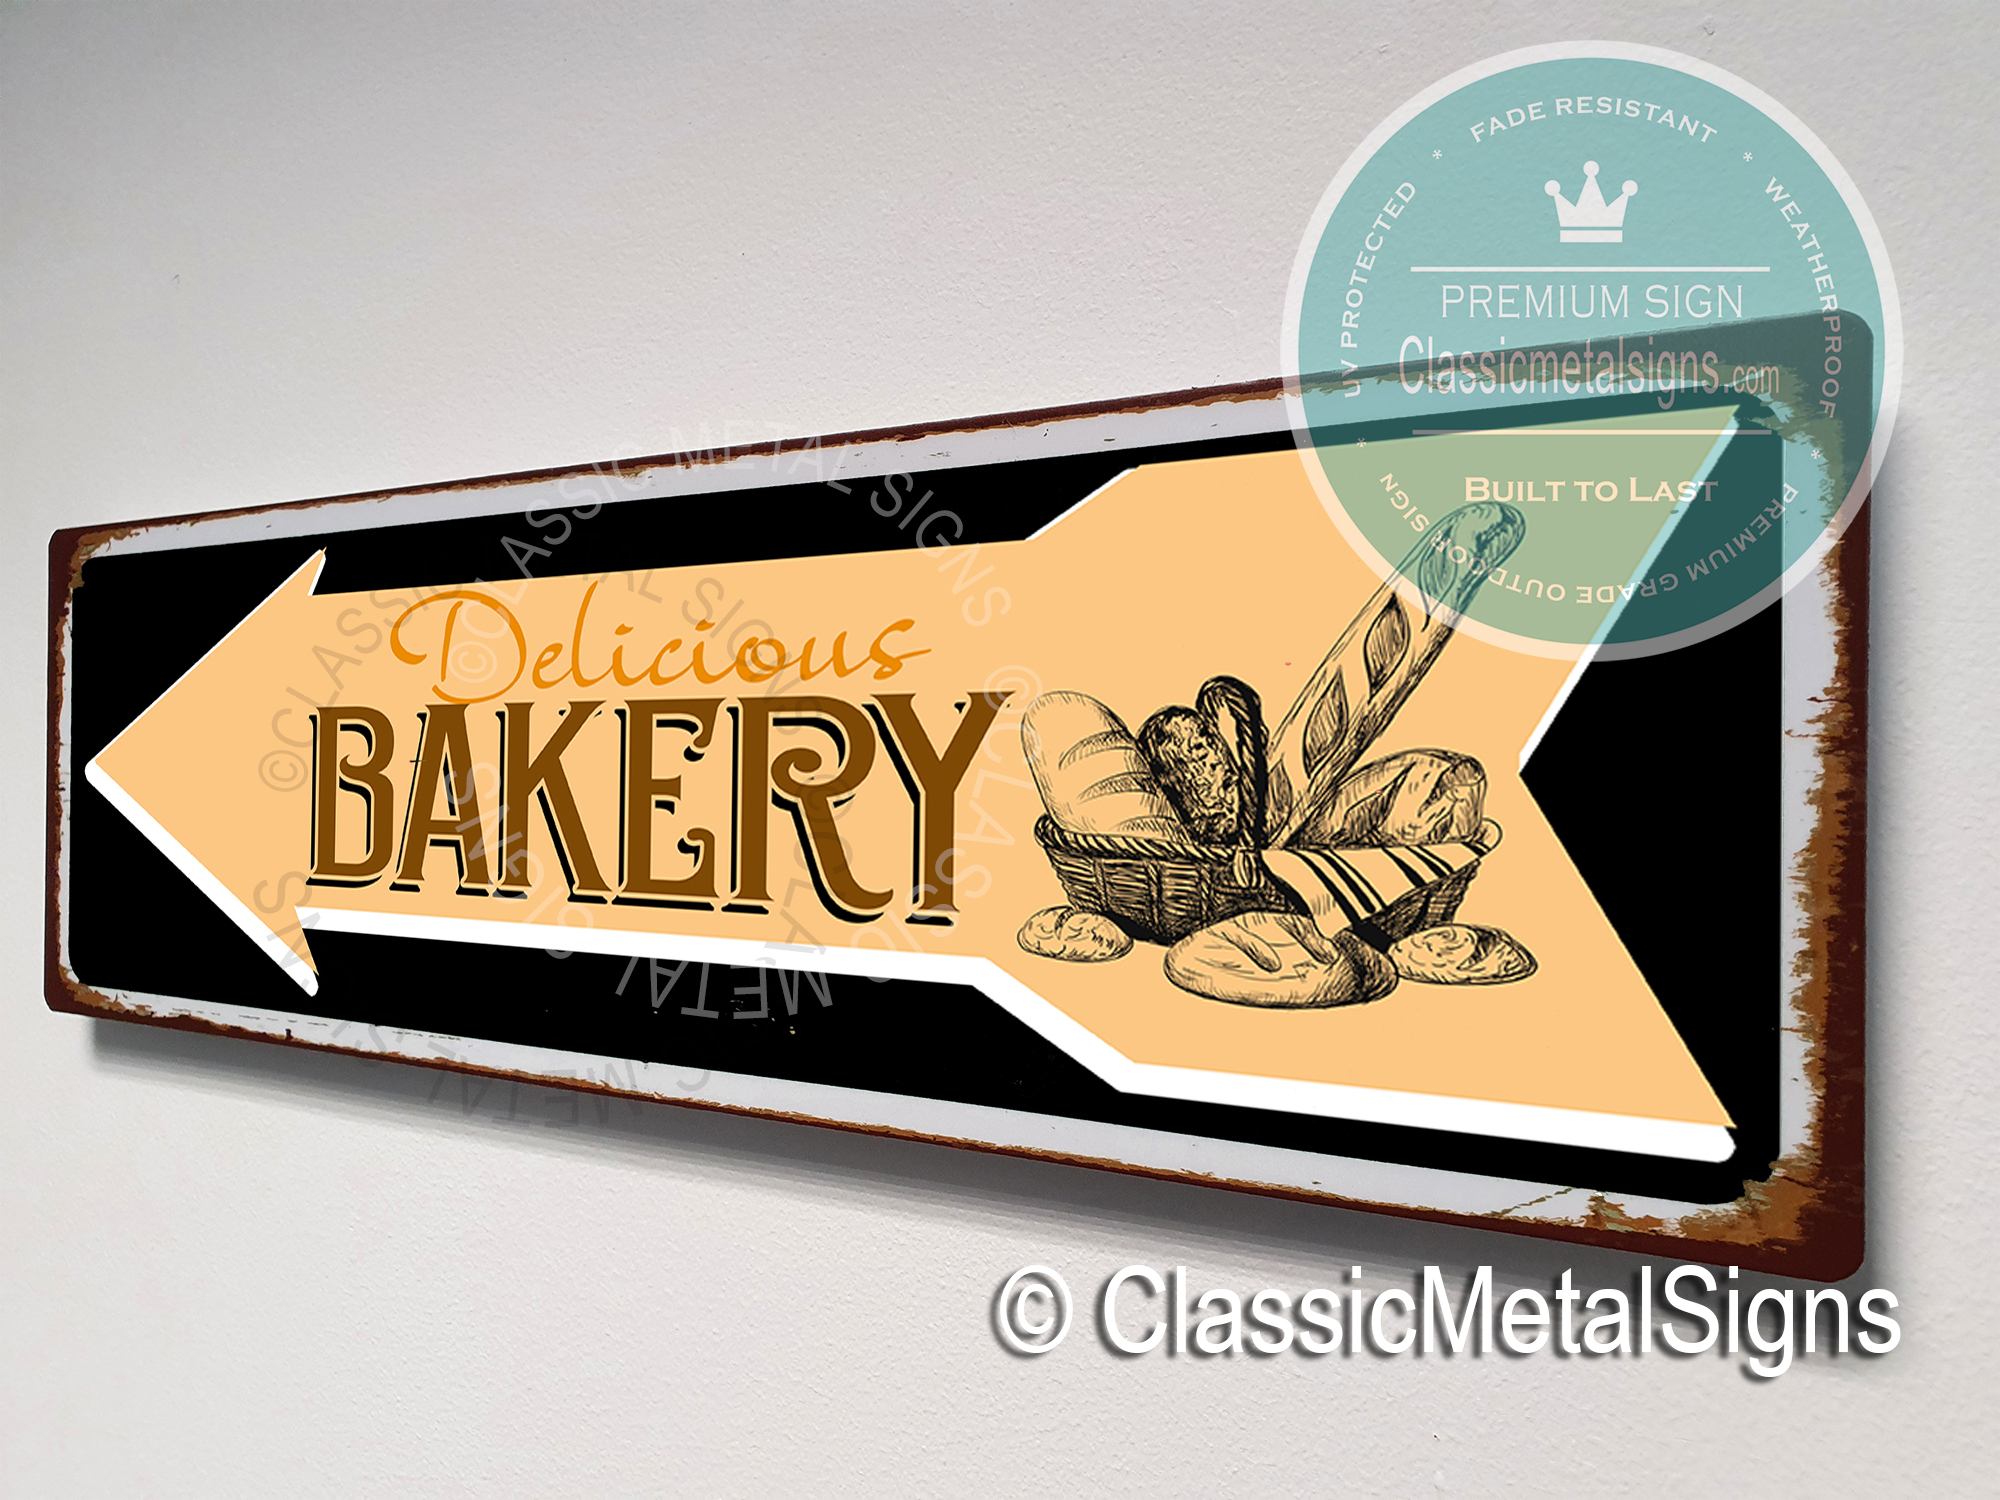 Vintage Style Bakery Sign - Classic Metal Signs